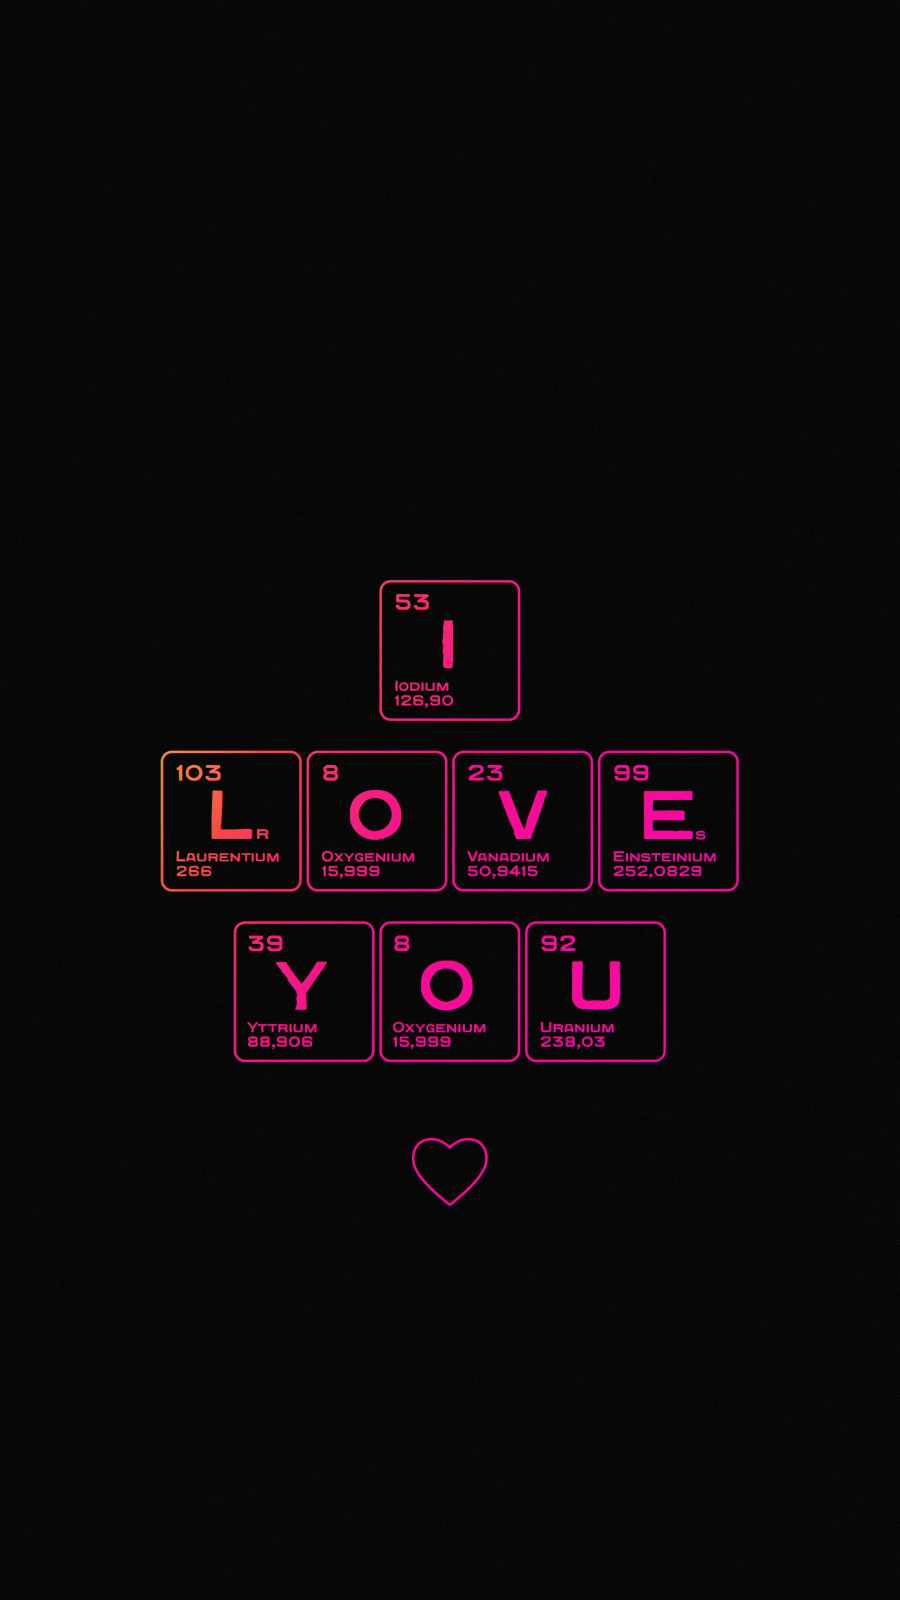 I Love You Wallpaper - IPhone Wallpapers : iPhone Wallpapers